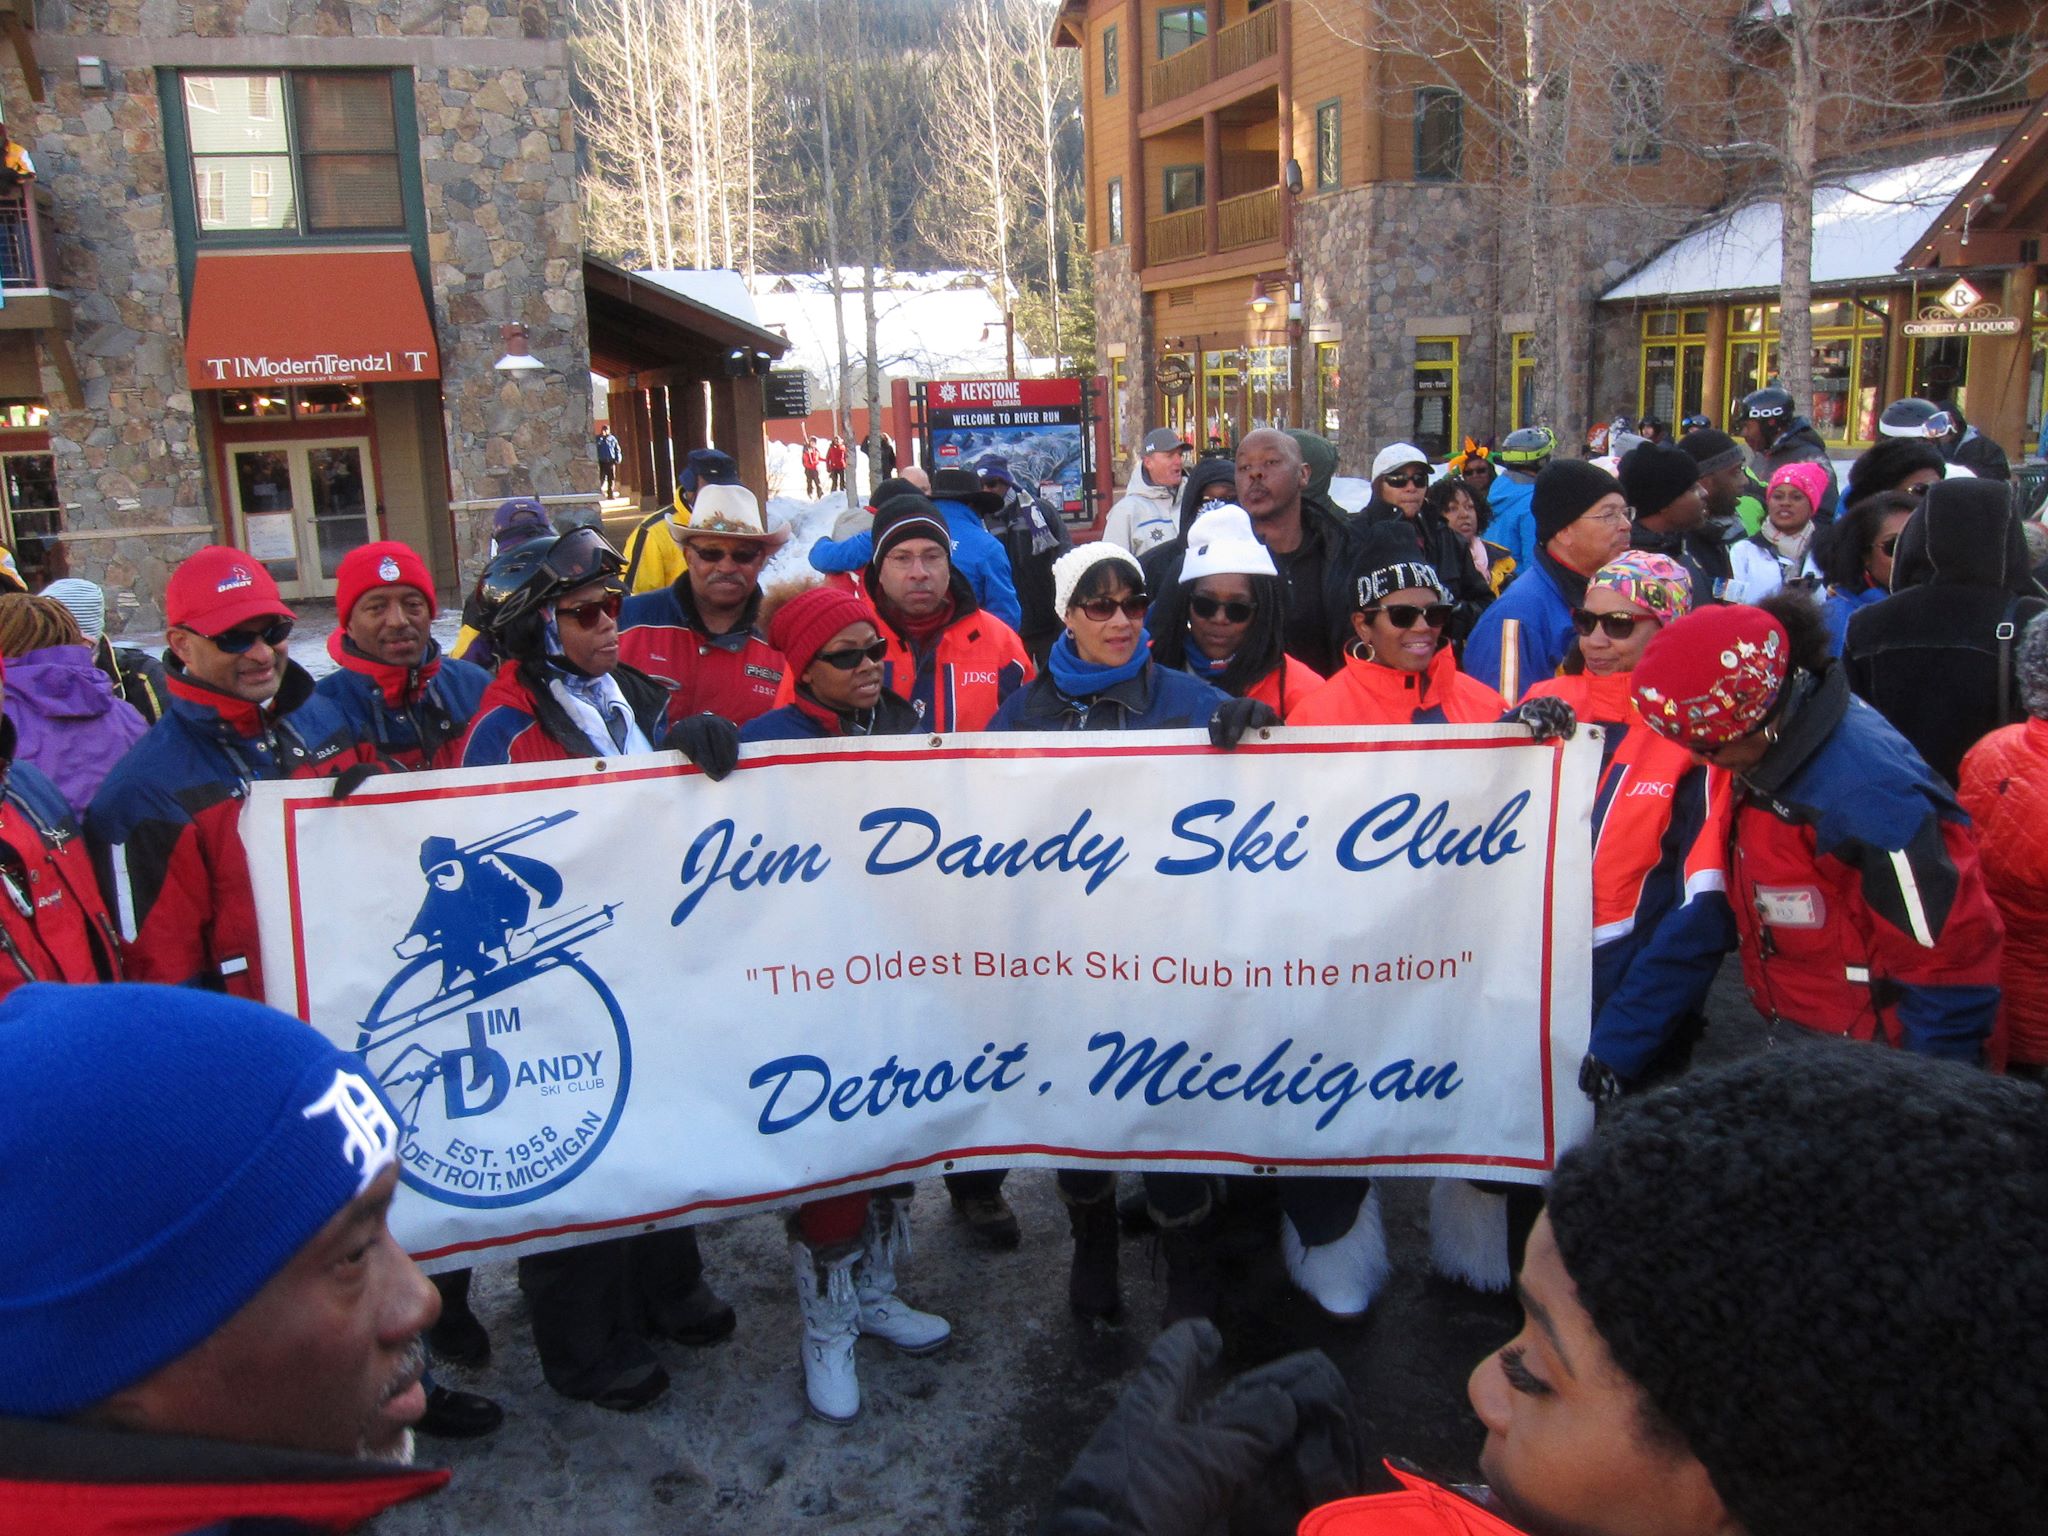 There are very few Black people who ski. The oldest Black ski club in the nation is working to change that